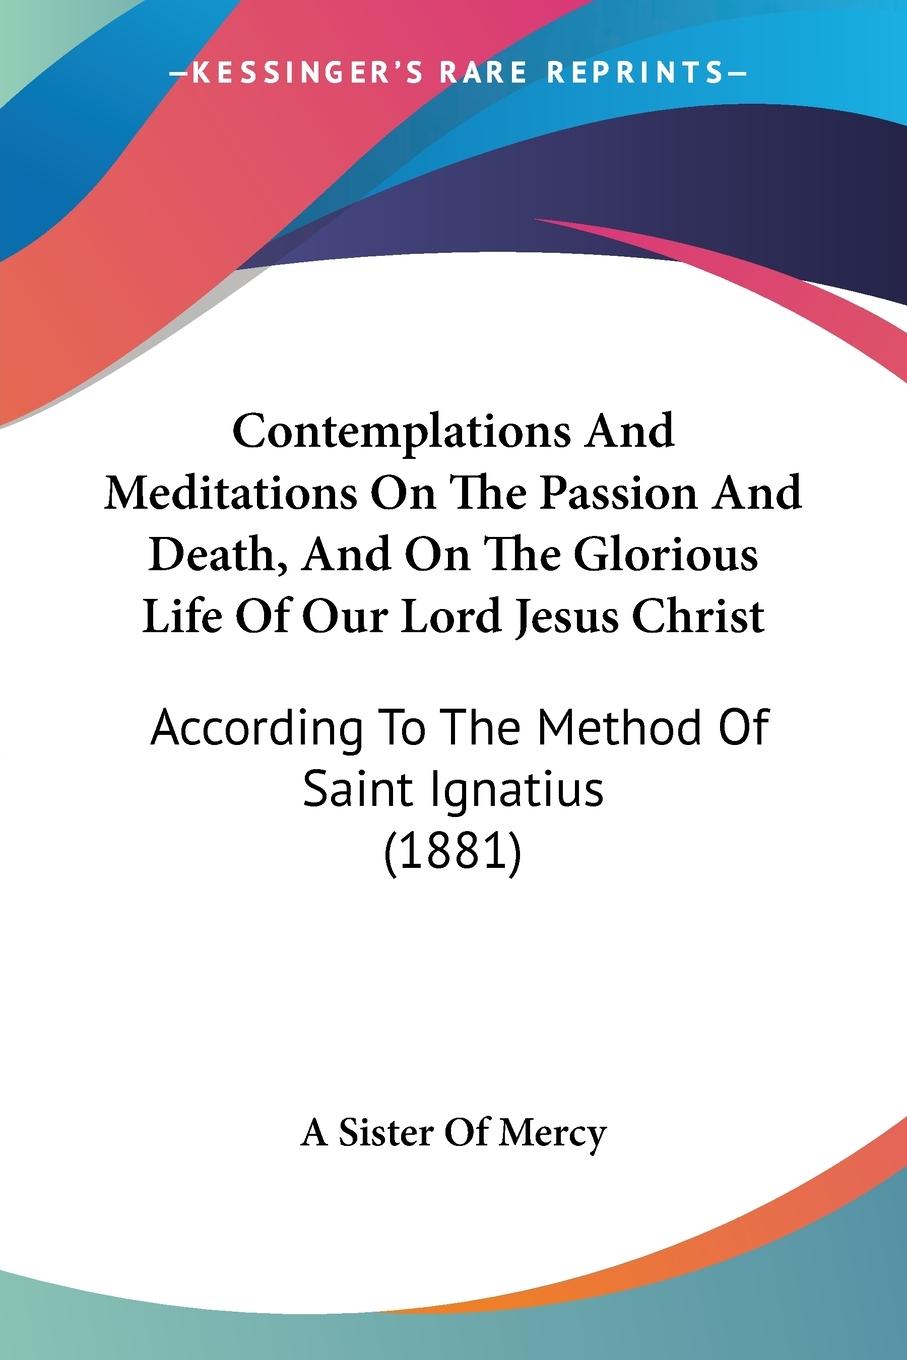 Contemplations And Meditations On The Passion And Death, And On The Glorious Life Of Our Lord Jesus Christ